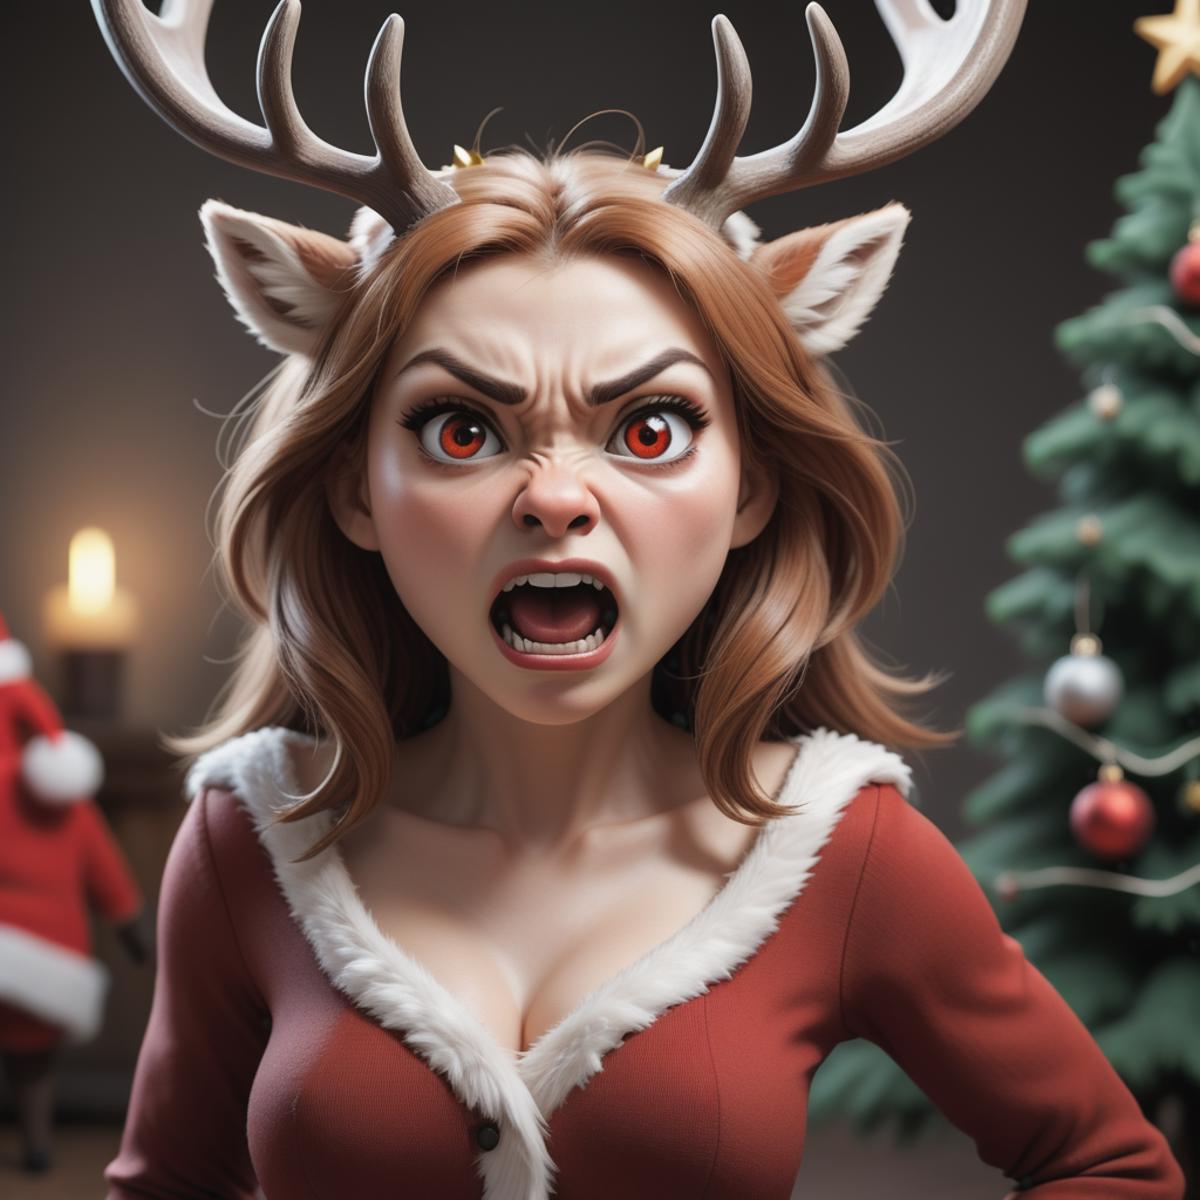 A woman with deer antlers on her head and a Santa outfit, screaming at the camera.